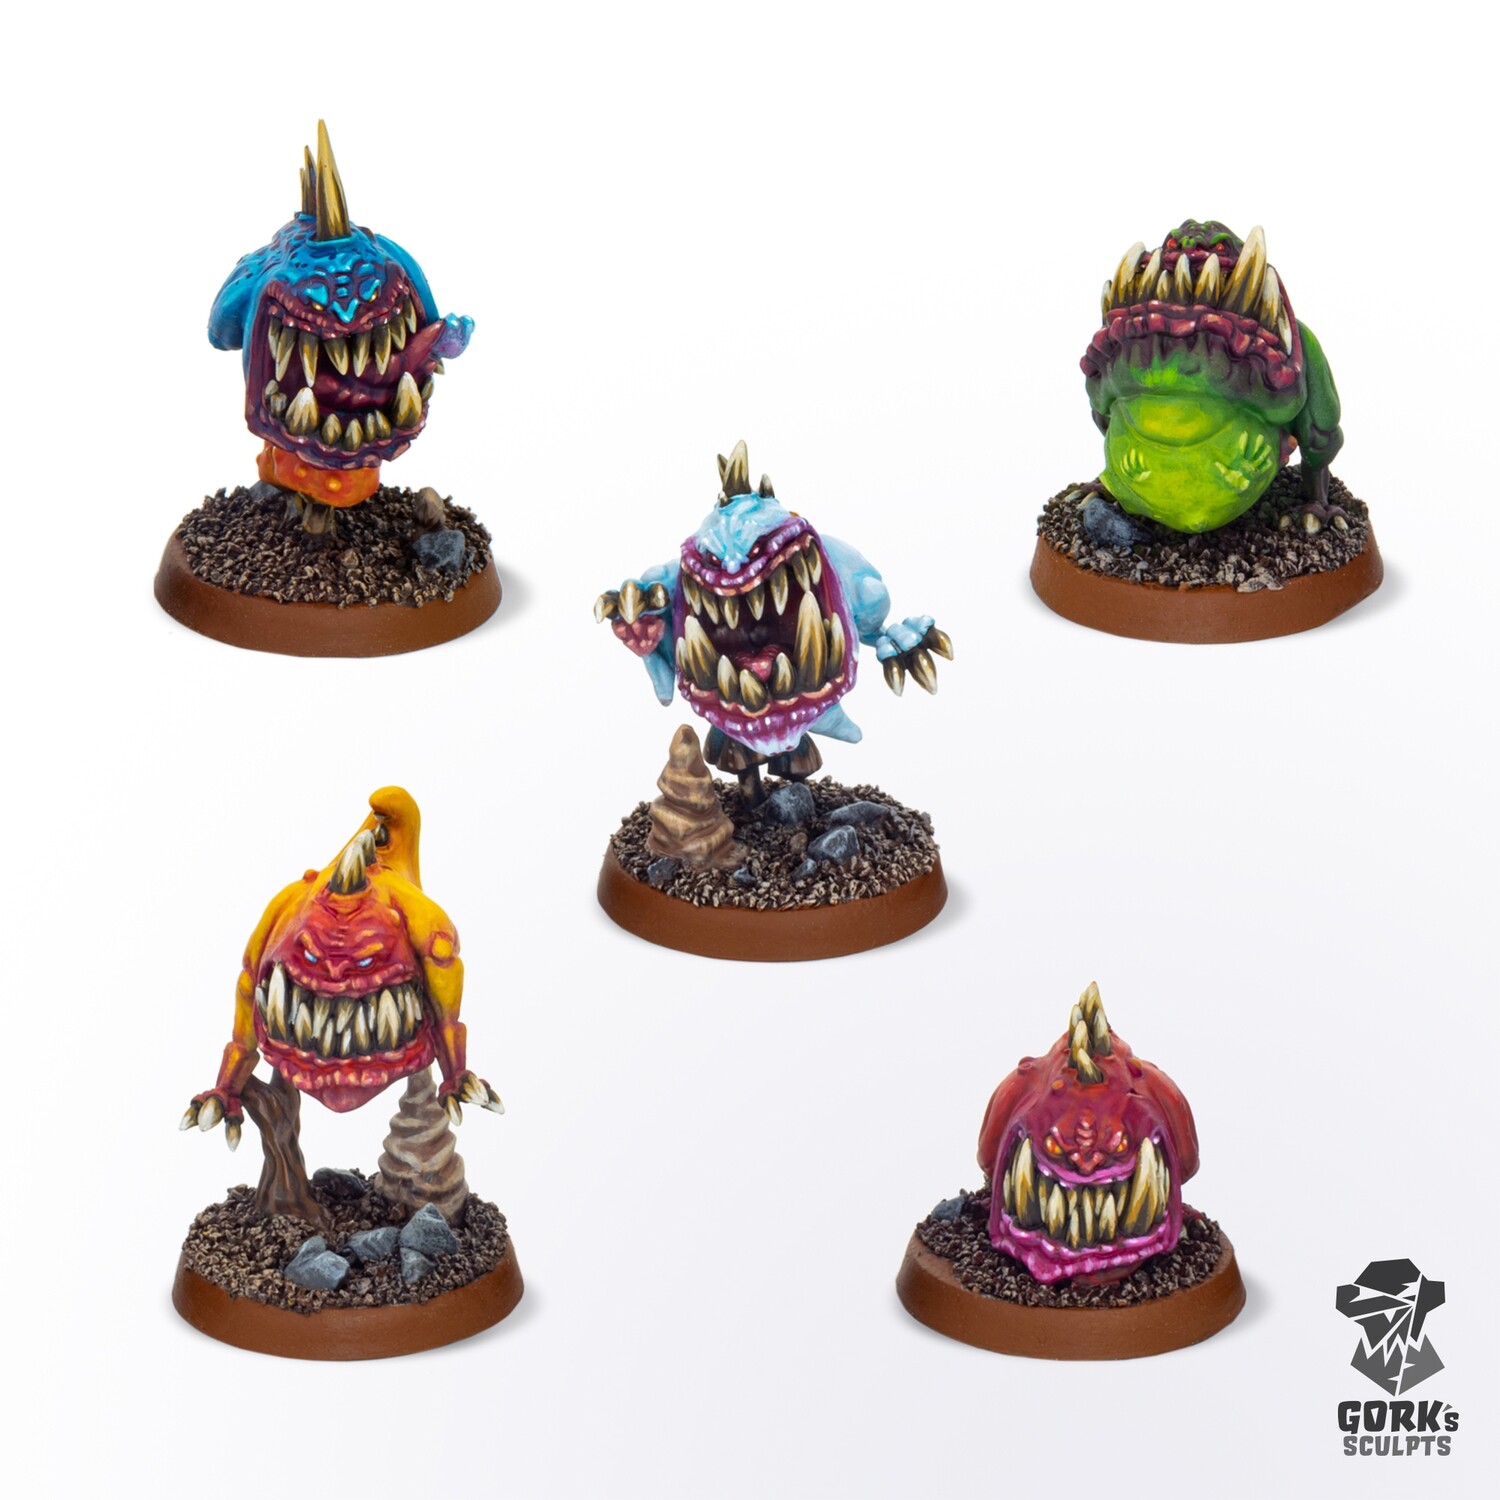 5 small cave monsters - Printed